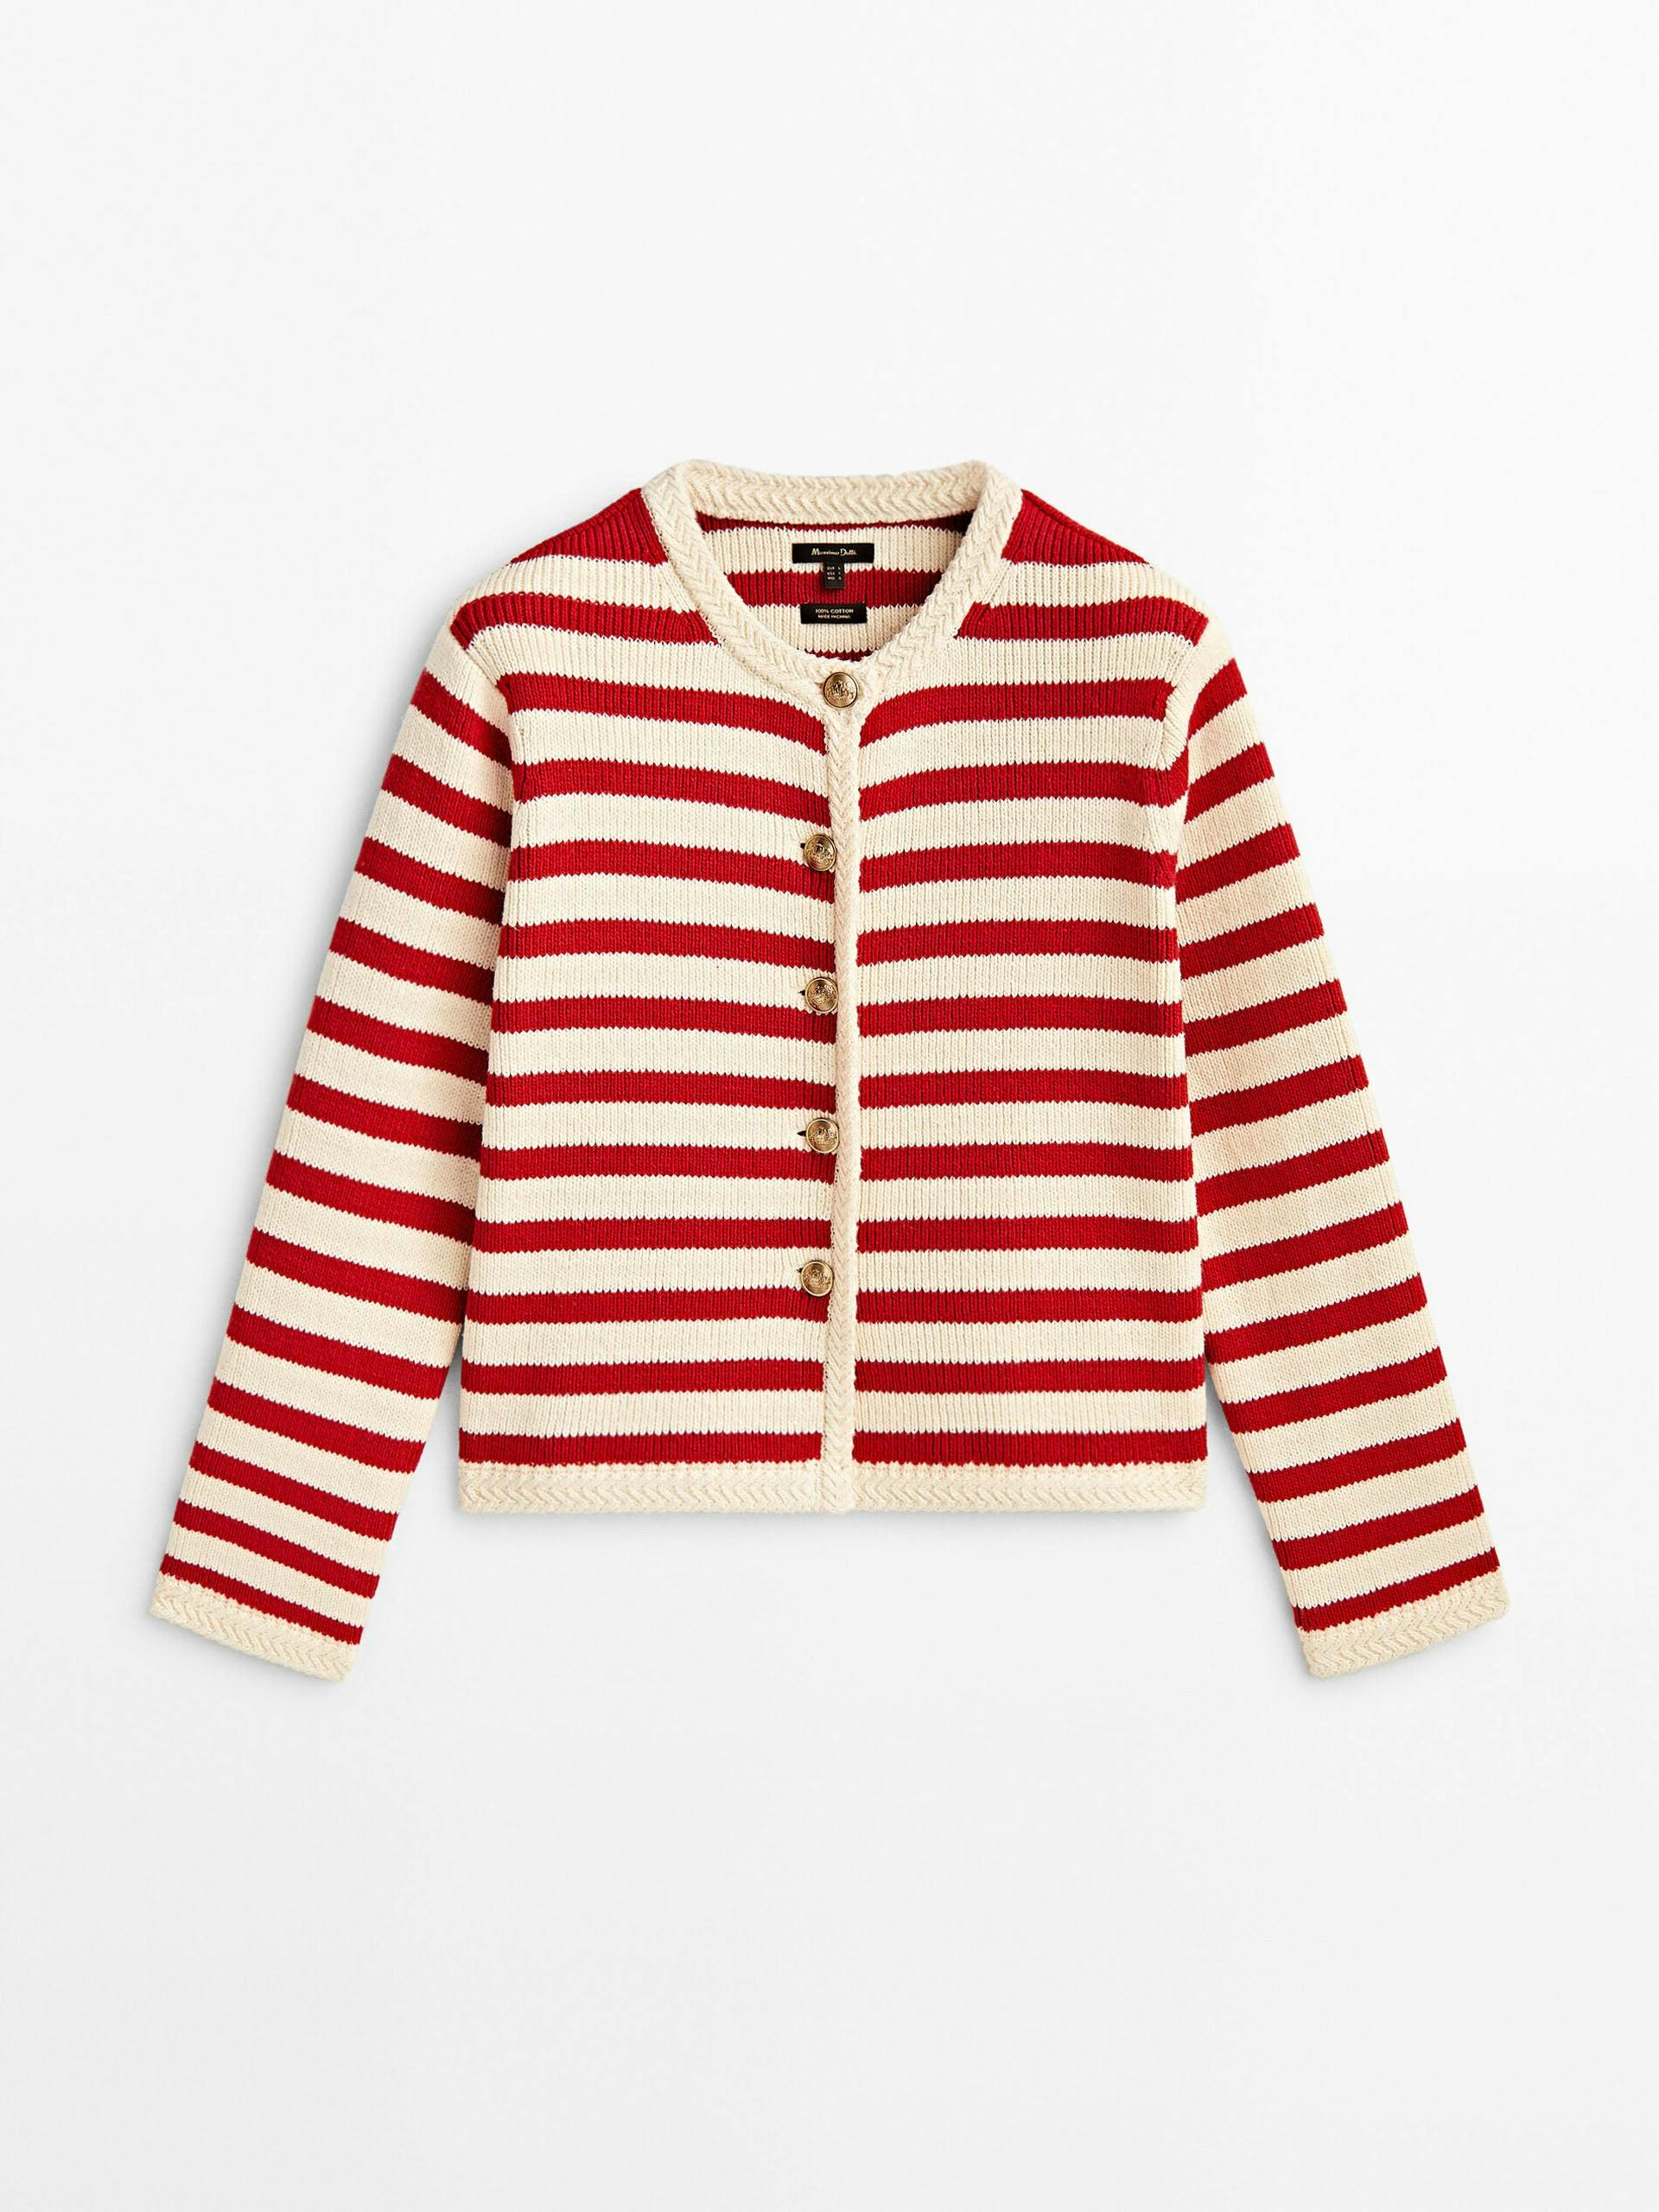 Stripe knit cardigan with buttons